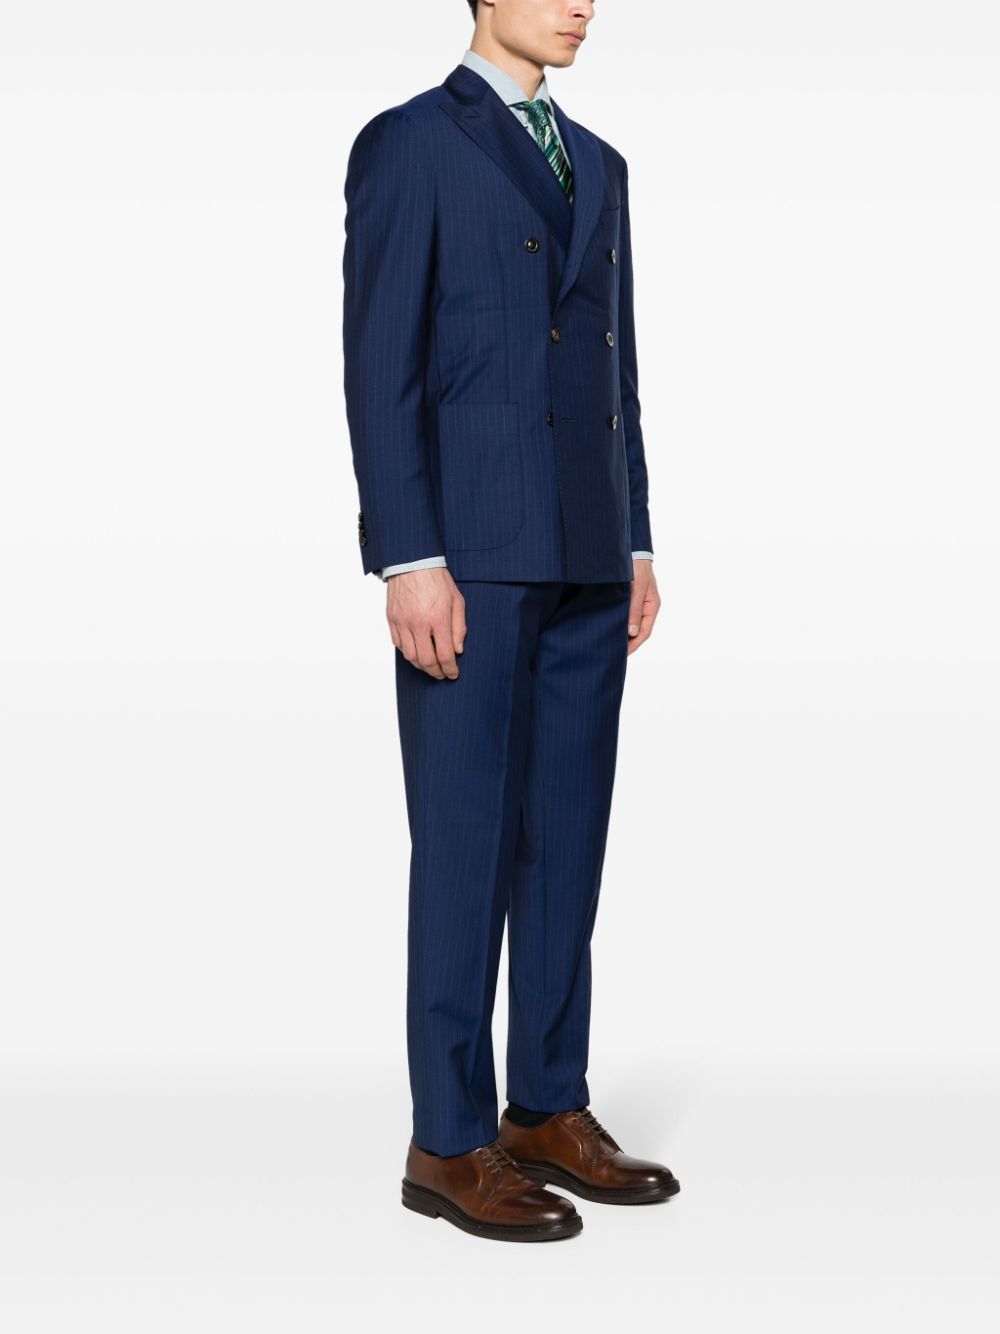 Double-breasted blue pinstripe suit